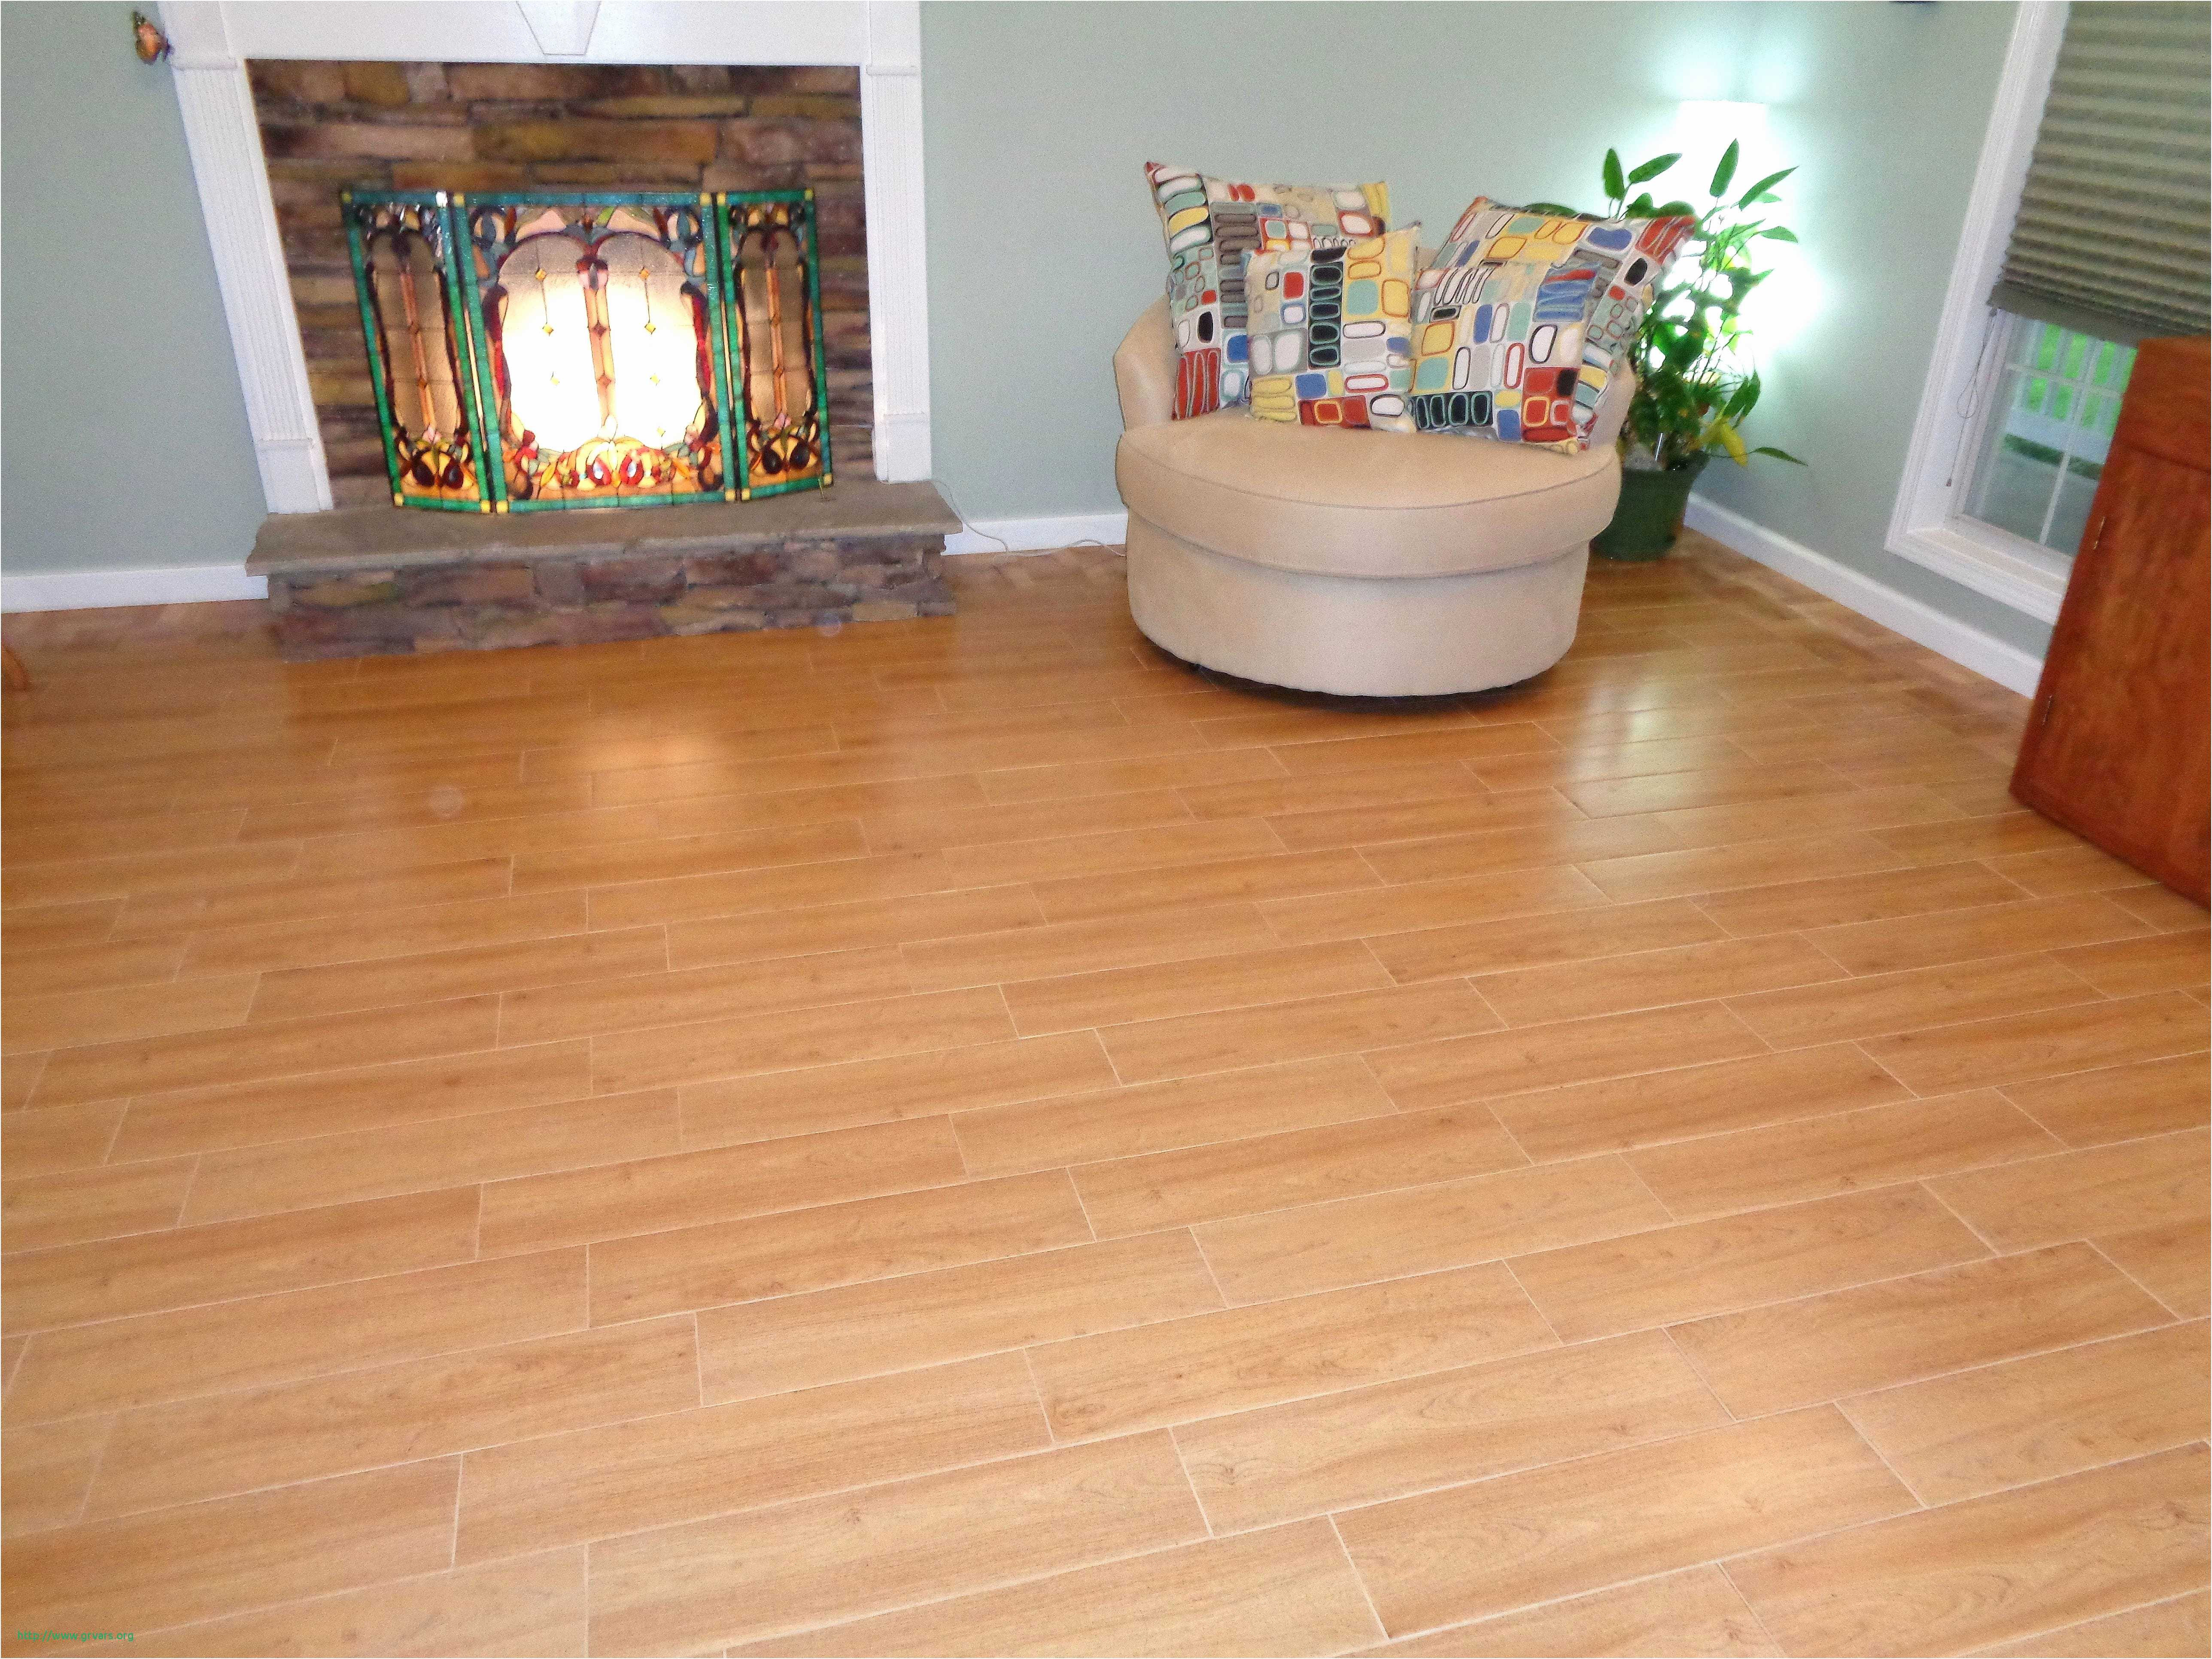 12 Wonderful Stained Hardwood Floors Pictures 2023 free download stained hardwood floors pictures of 24 beau changing the color of hardwood floors ideas blog pertaining to changing the color of hardwood floors inspirant pergo flooring colors concrete tom 